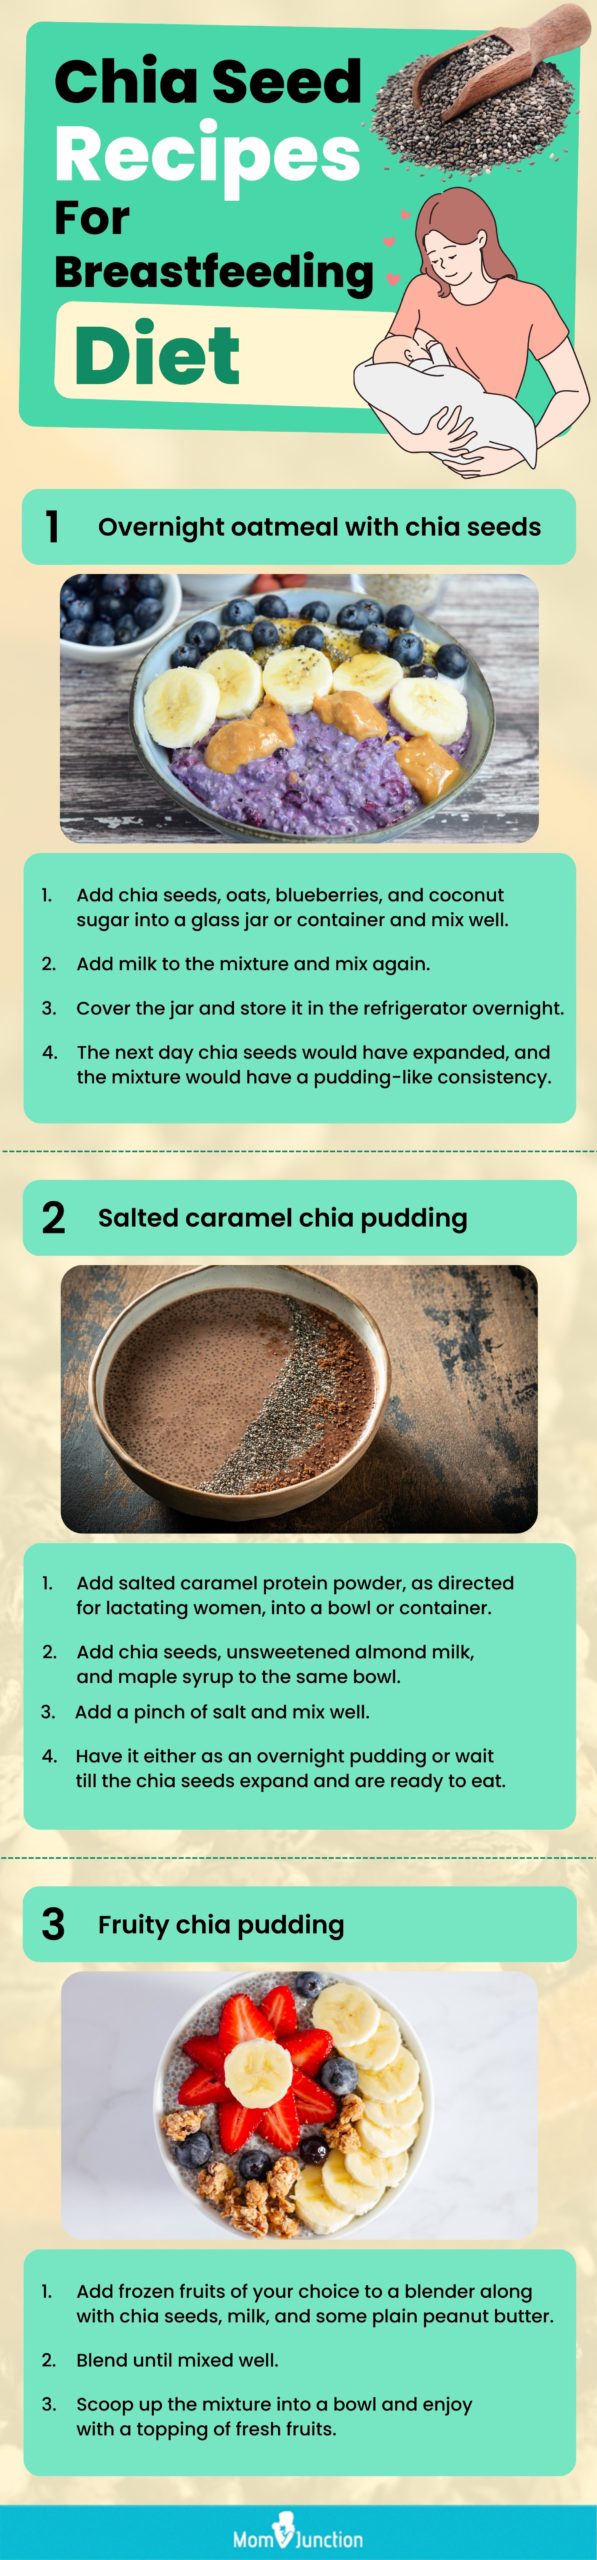 chia seed recipes for breastfeeding diet (infographic)